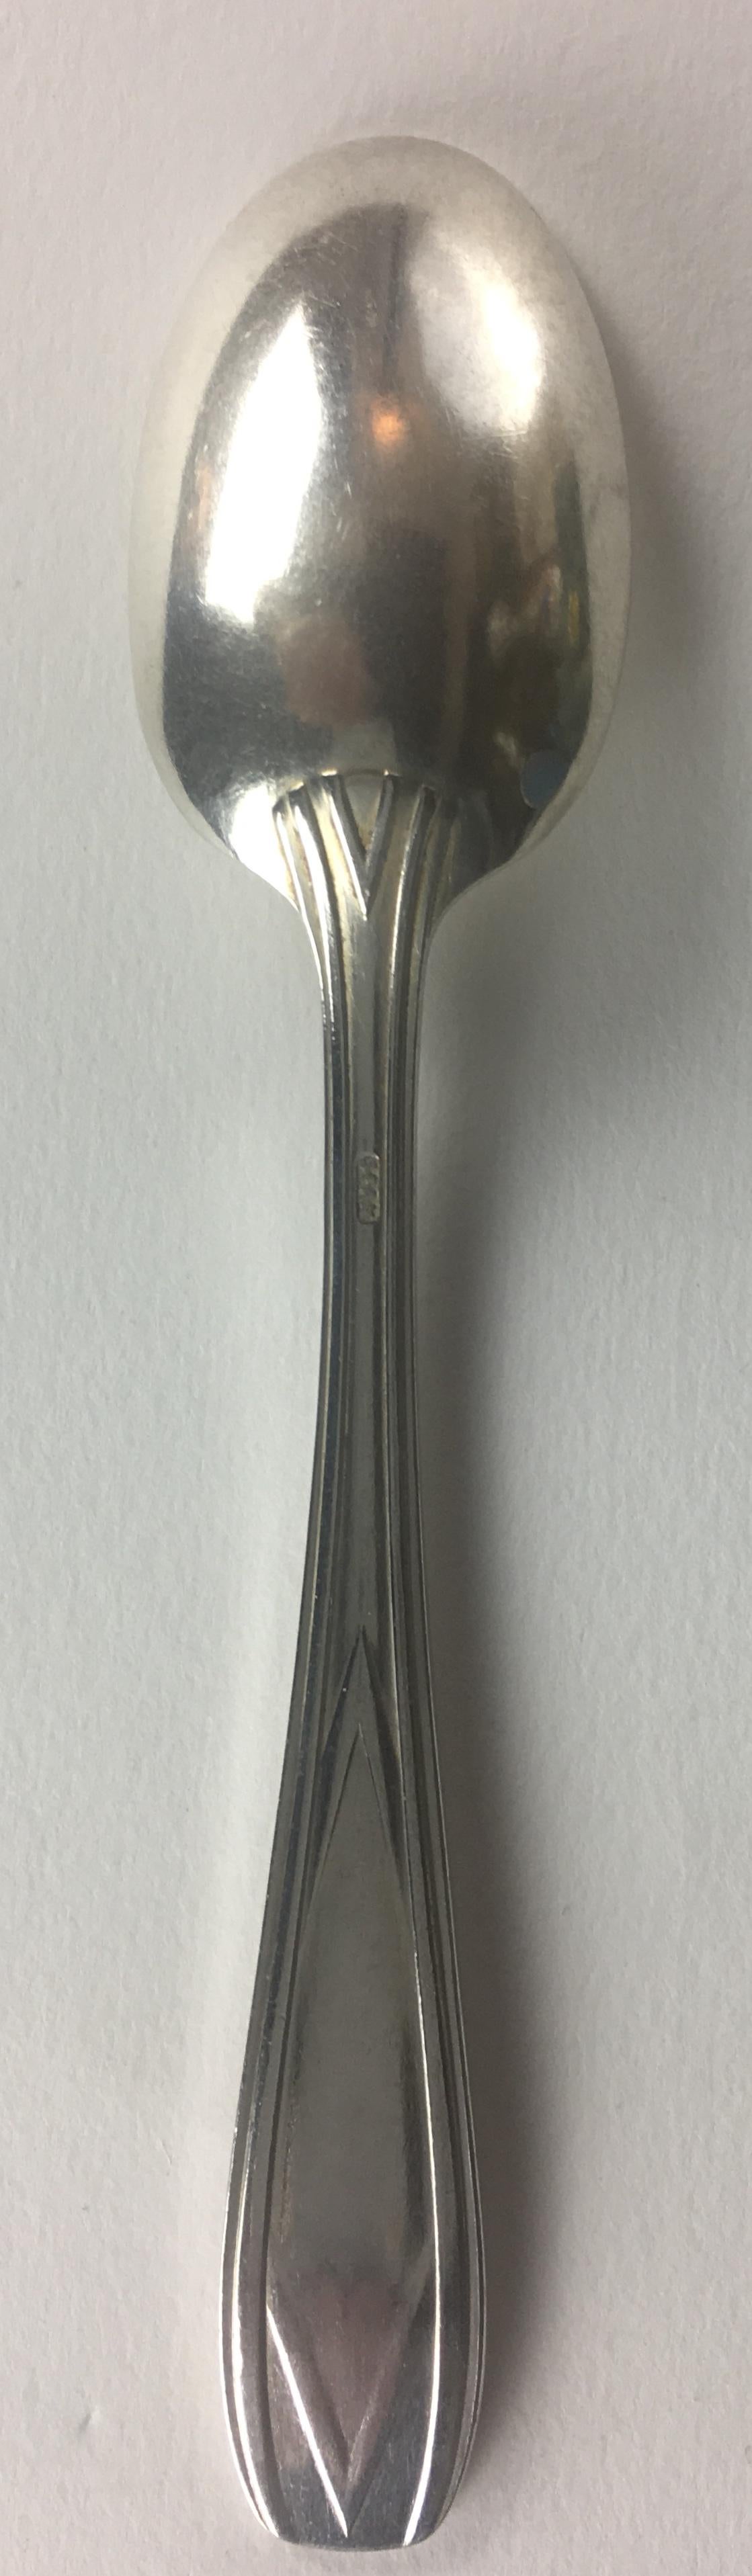 20th Century French Art Deco Silver Plated Tea Spoon Set of 12 with Original Box For Sale